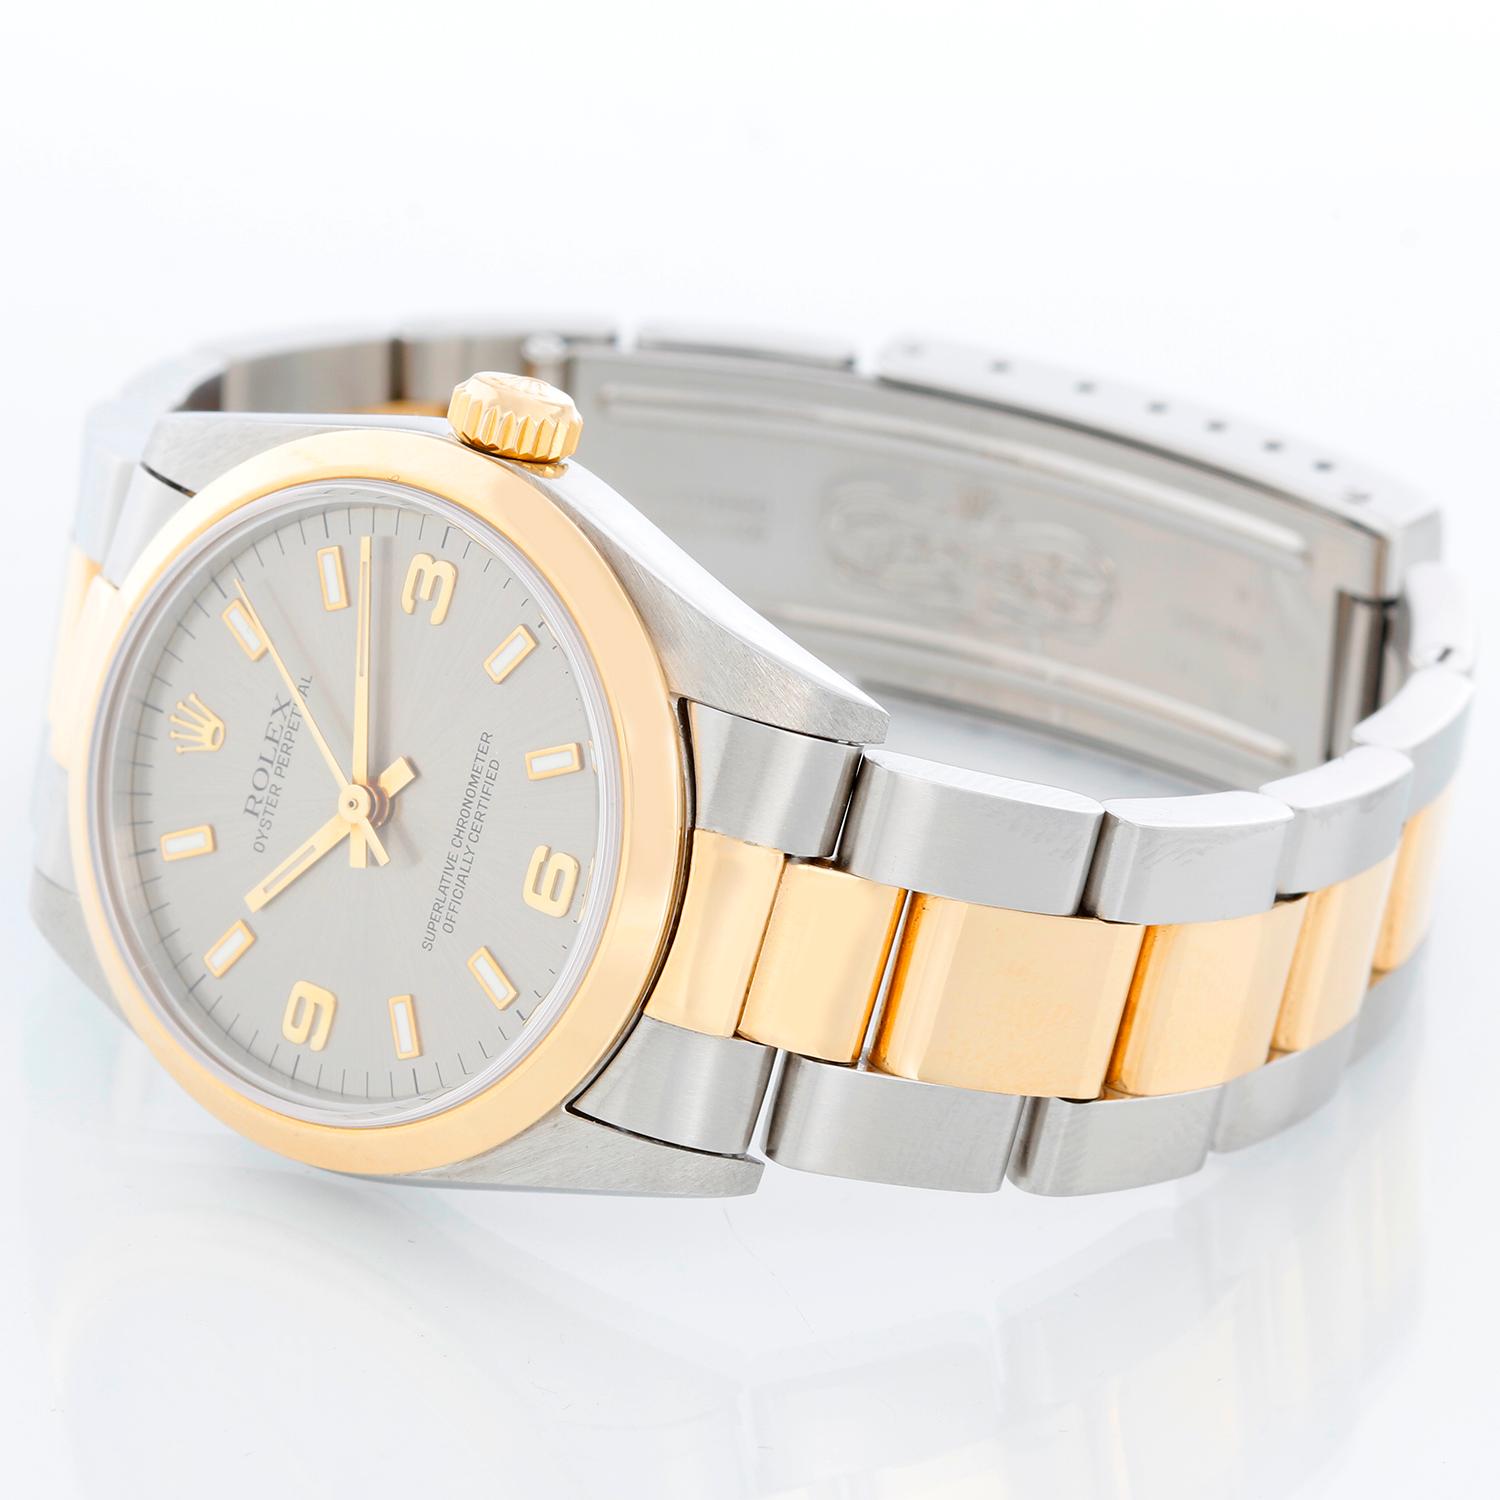 Rolex Oyster Perpetual 2-Tone 31 MM Mens Watch 67483 - Automatic winding, 29 jewels, Quickset date, sapphire crystal. Stainless steel case with yellow gold bezel ( 31mm) . Silver dial with roman numerals and stick hour markers. 18K Yellow gold and